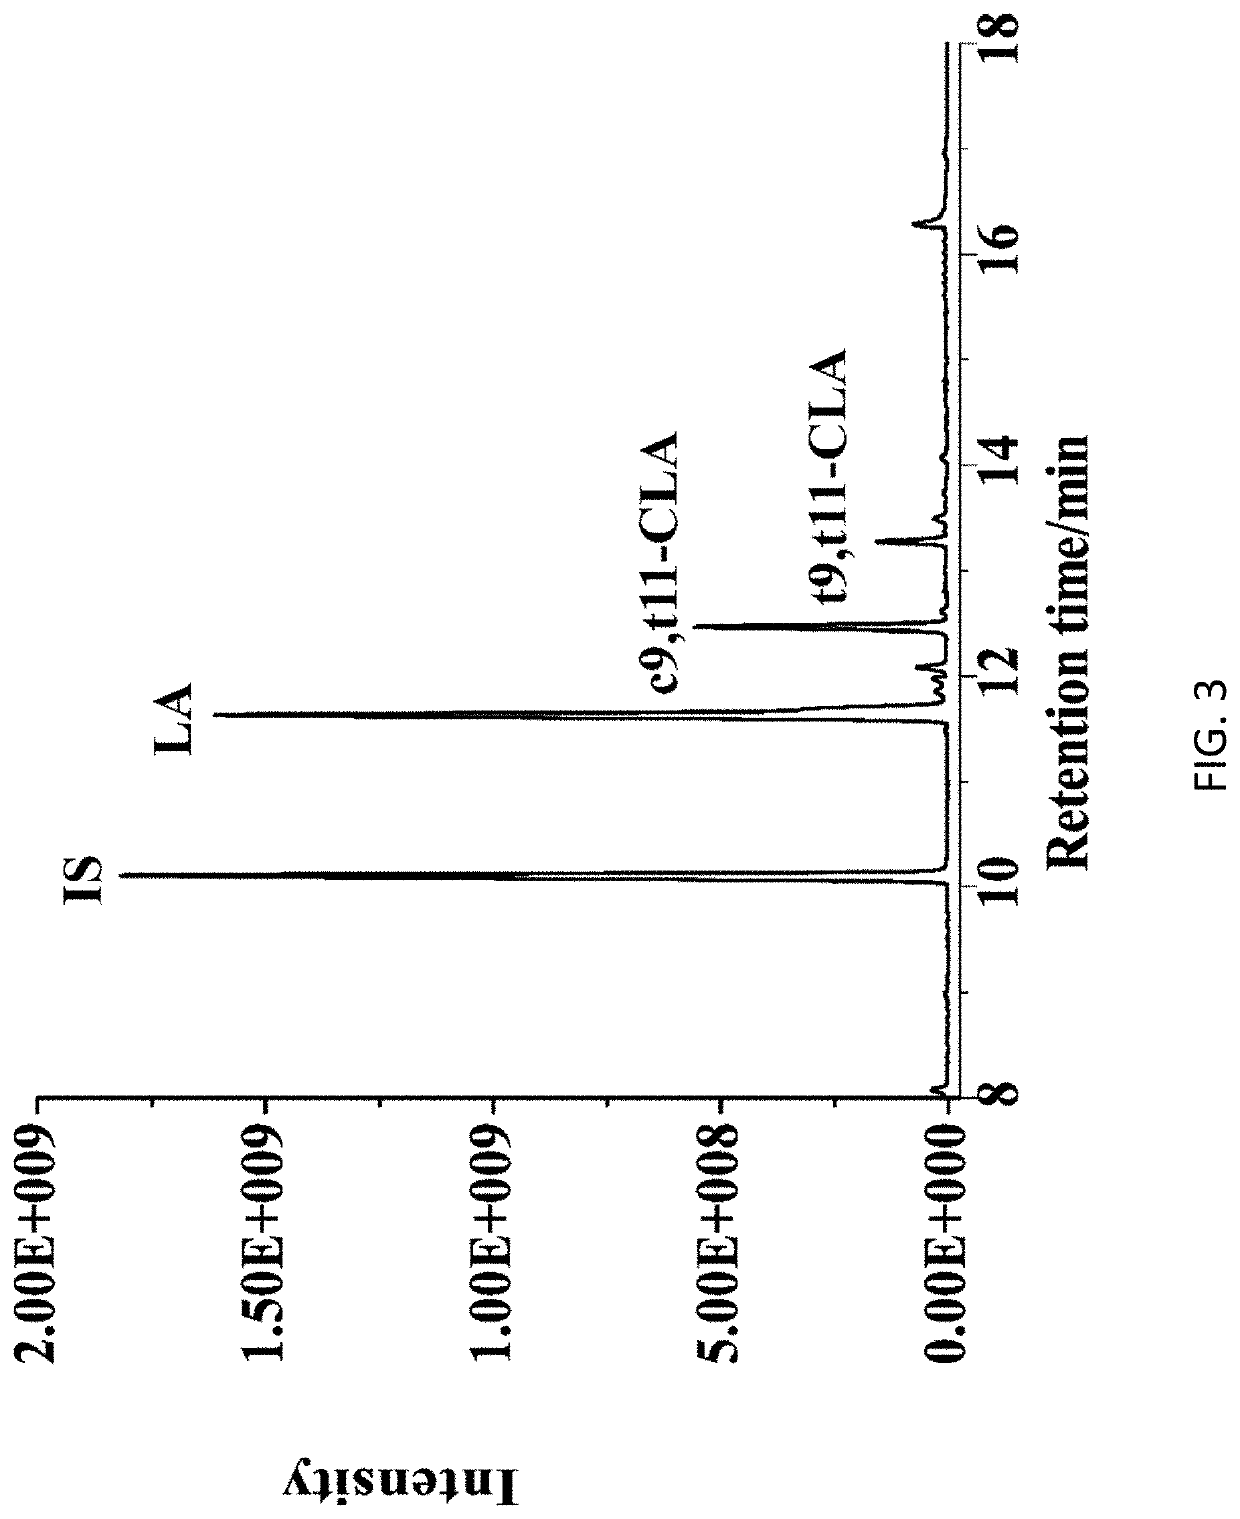 Linoleic Acid Isomerase and its Application in Production of Conjugated Linoleic Acid